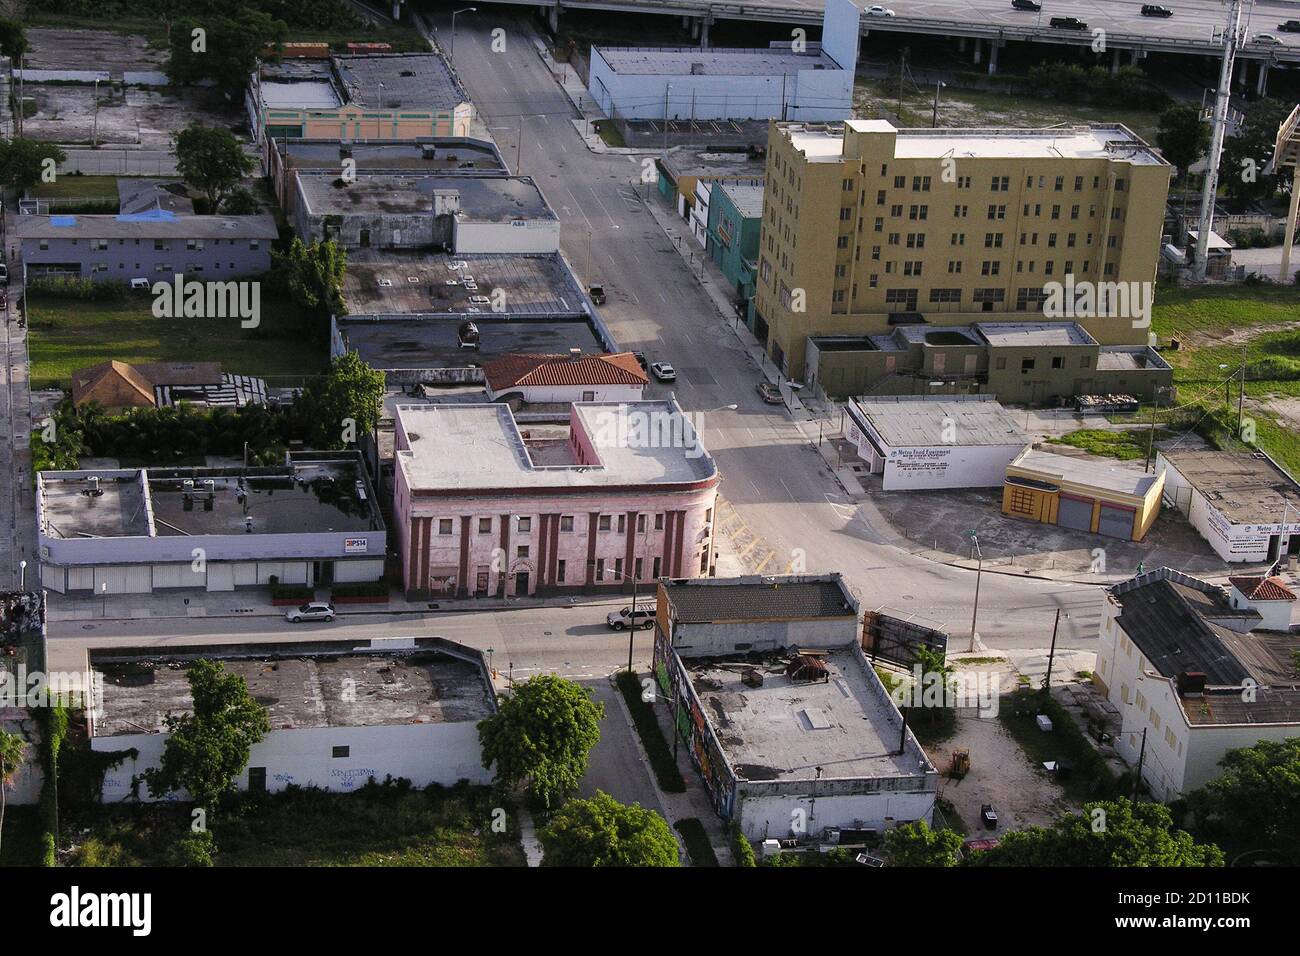 Miami, Florida, USA - September 2005:  Archival aerial view of buidling and roads in the historic Overtown neighborhood near downtown Miami. Stock Photo